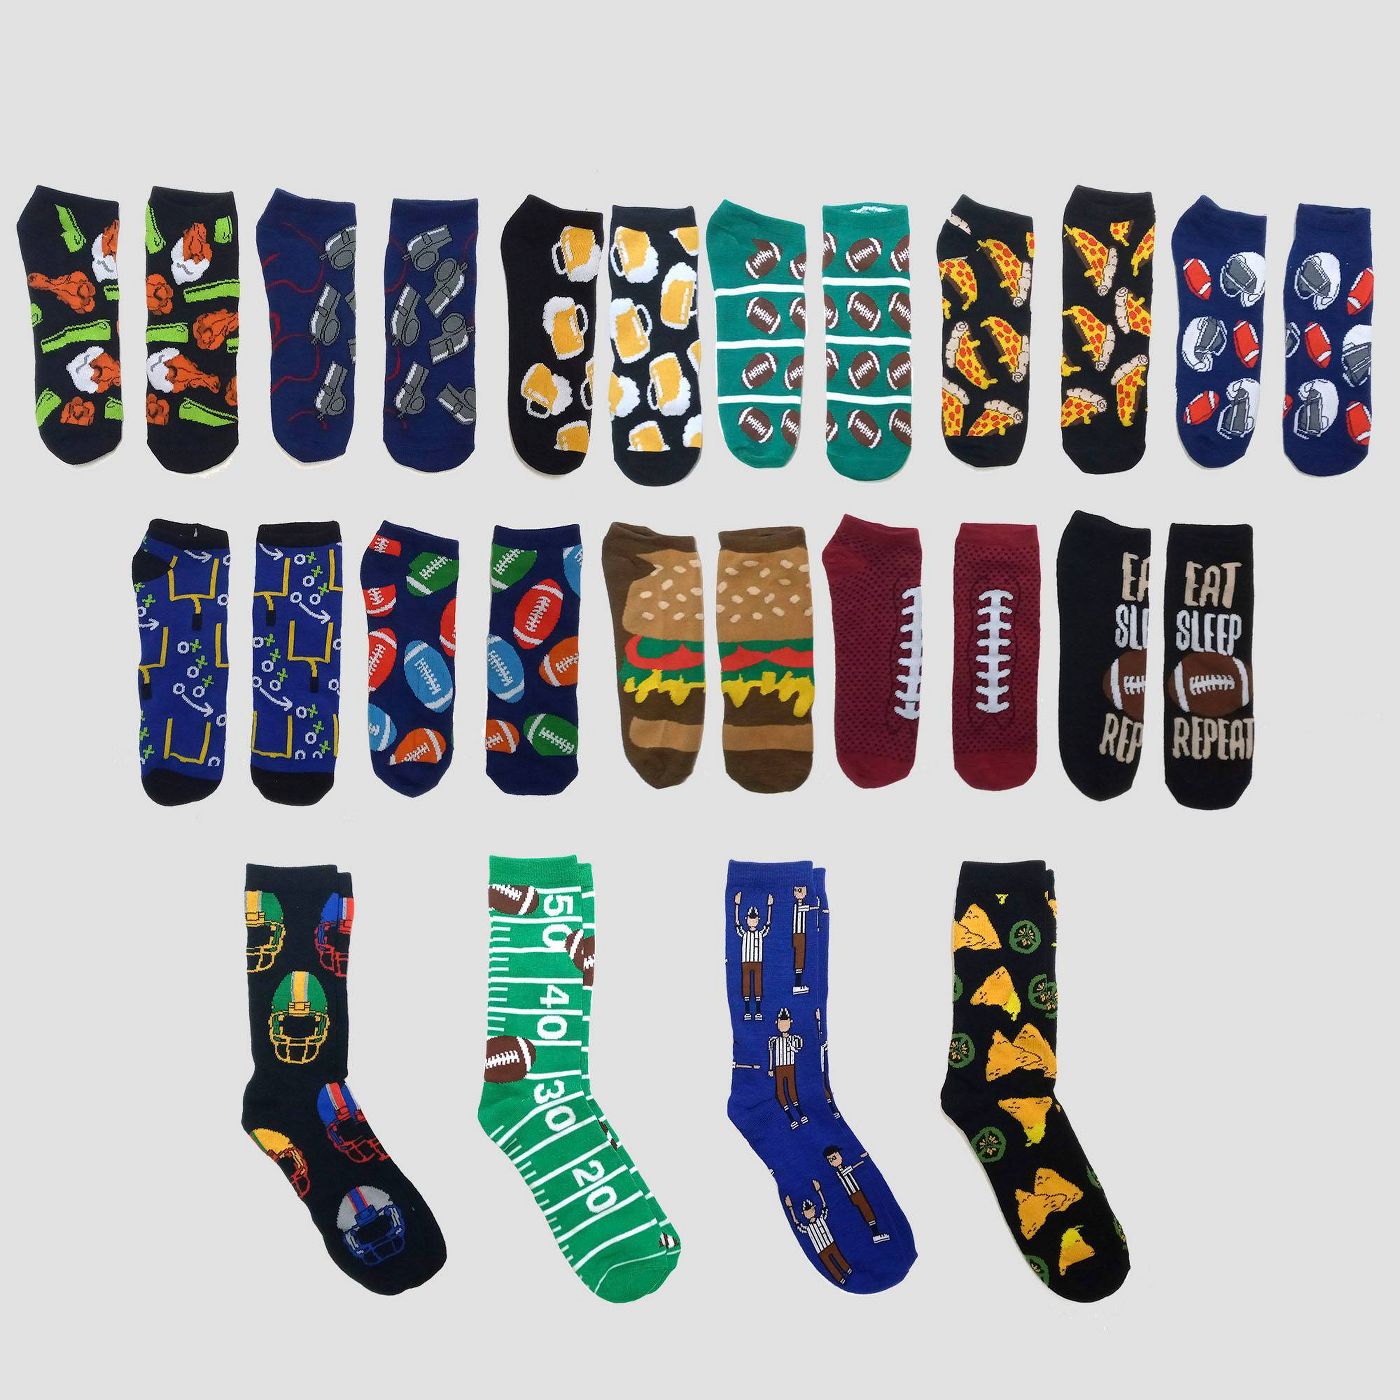 Men's Game Day 15 Days of Socks Advent Calendar - Assorted Colors One Size - image 1 of 4